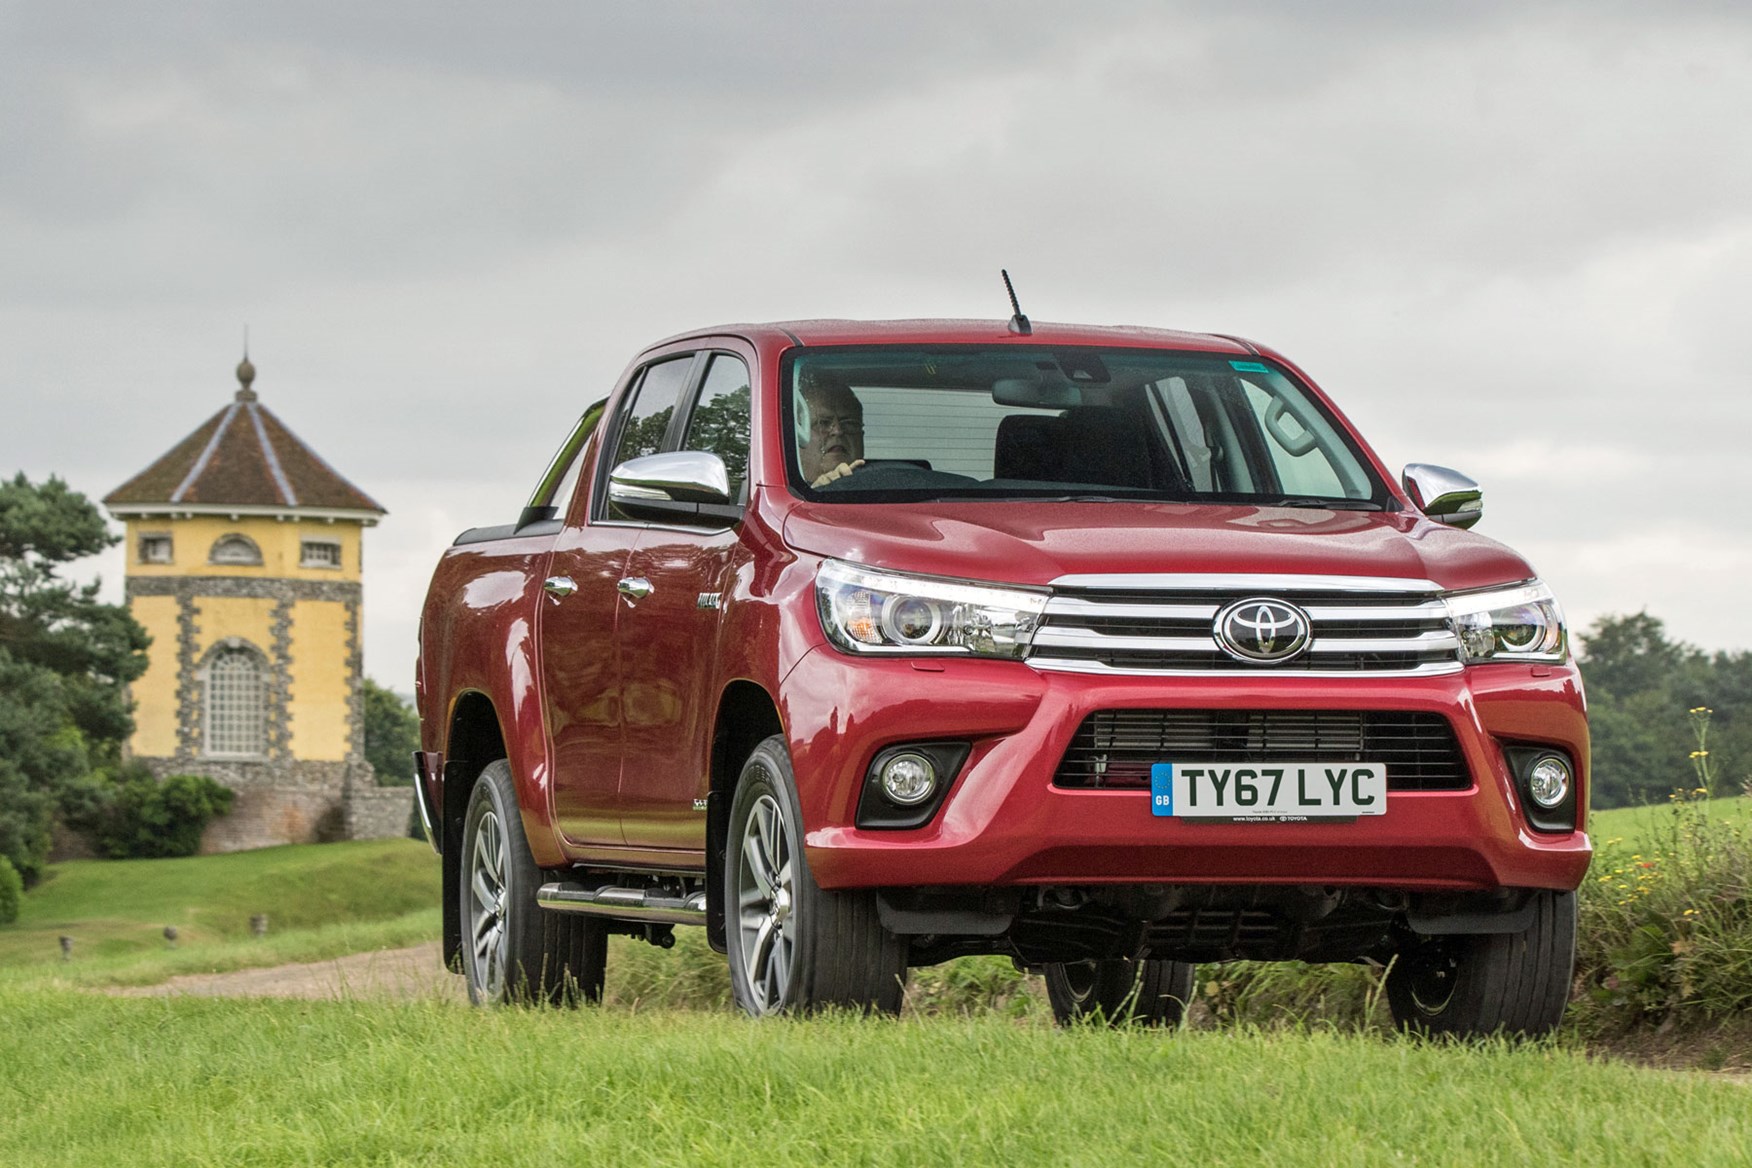 Toyota Hilux review - front view, driving, red, Invincible